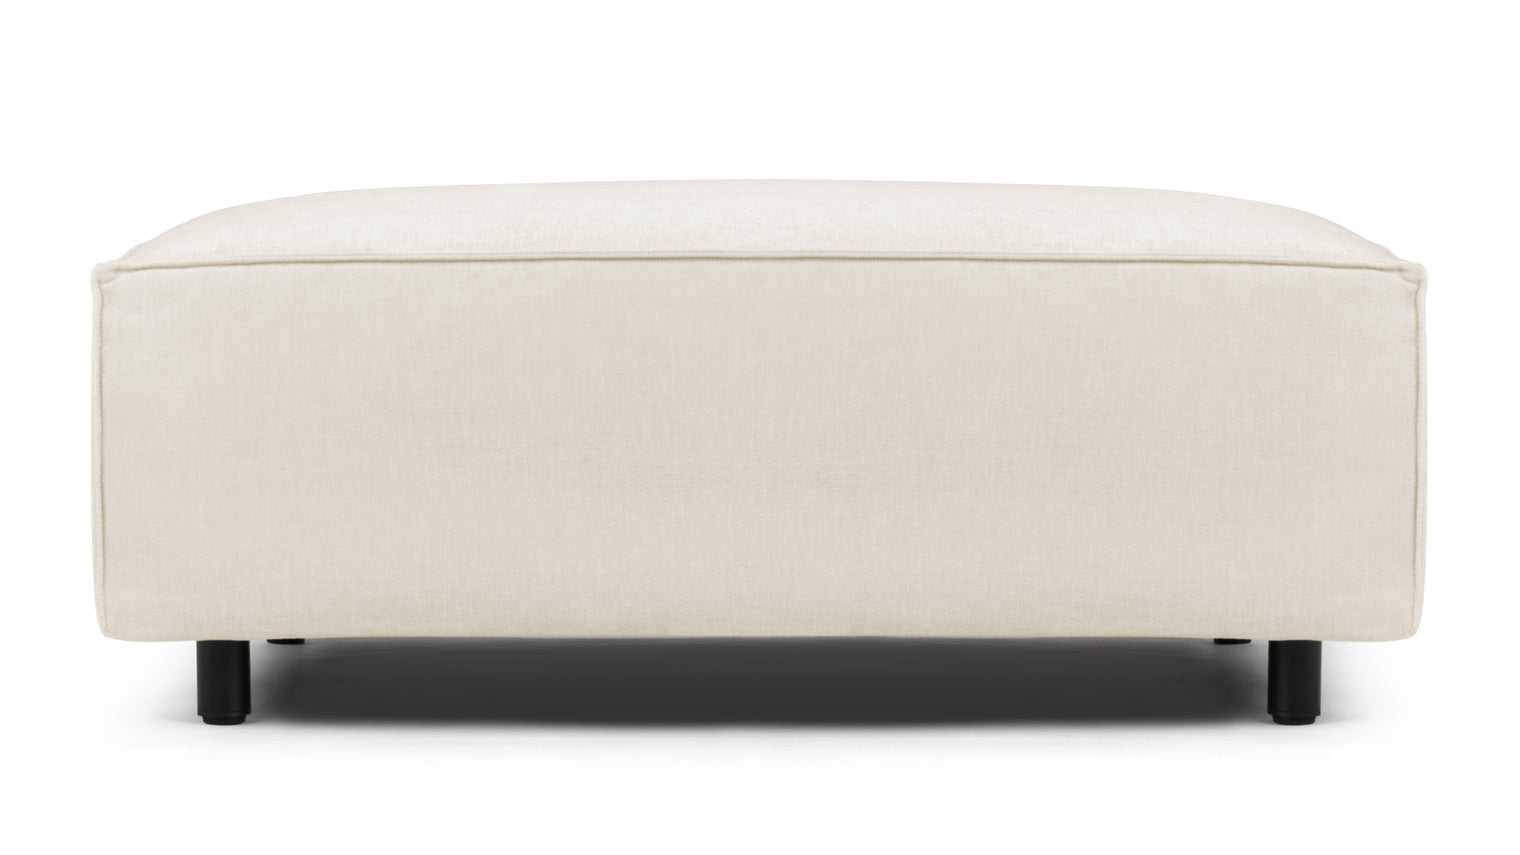 Unparalleled Comfort | Sink into a world of pure comfort as you lounge on the Extrasoft Sofa. Its plush, oversized cushions are filled with the highest quality materials, providing an irresistibly soft and supportive seating experience. Whether you're watching a movie, reading a book, or simply unwinding after a long day, this sofa offers an oasis of relaxation.
